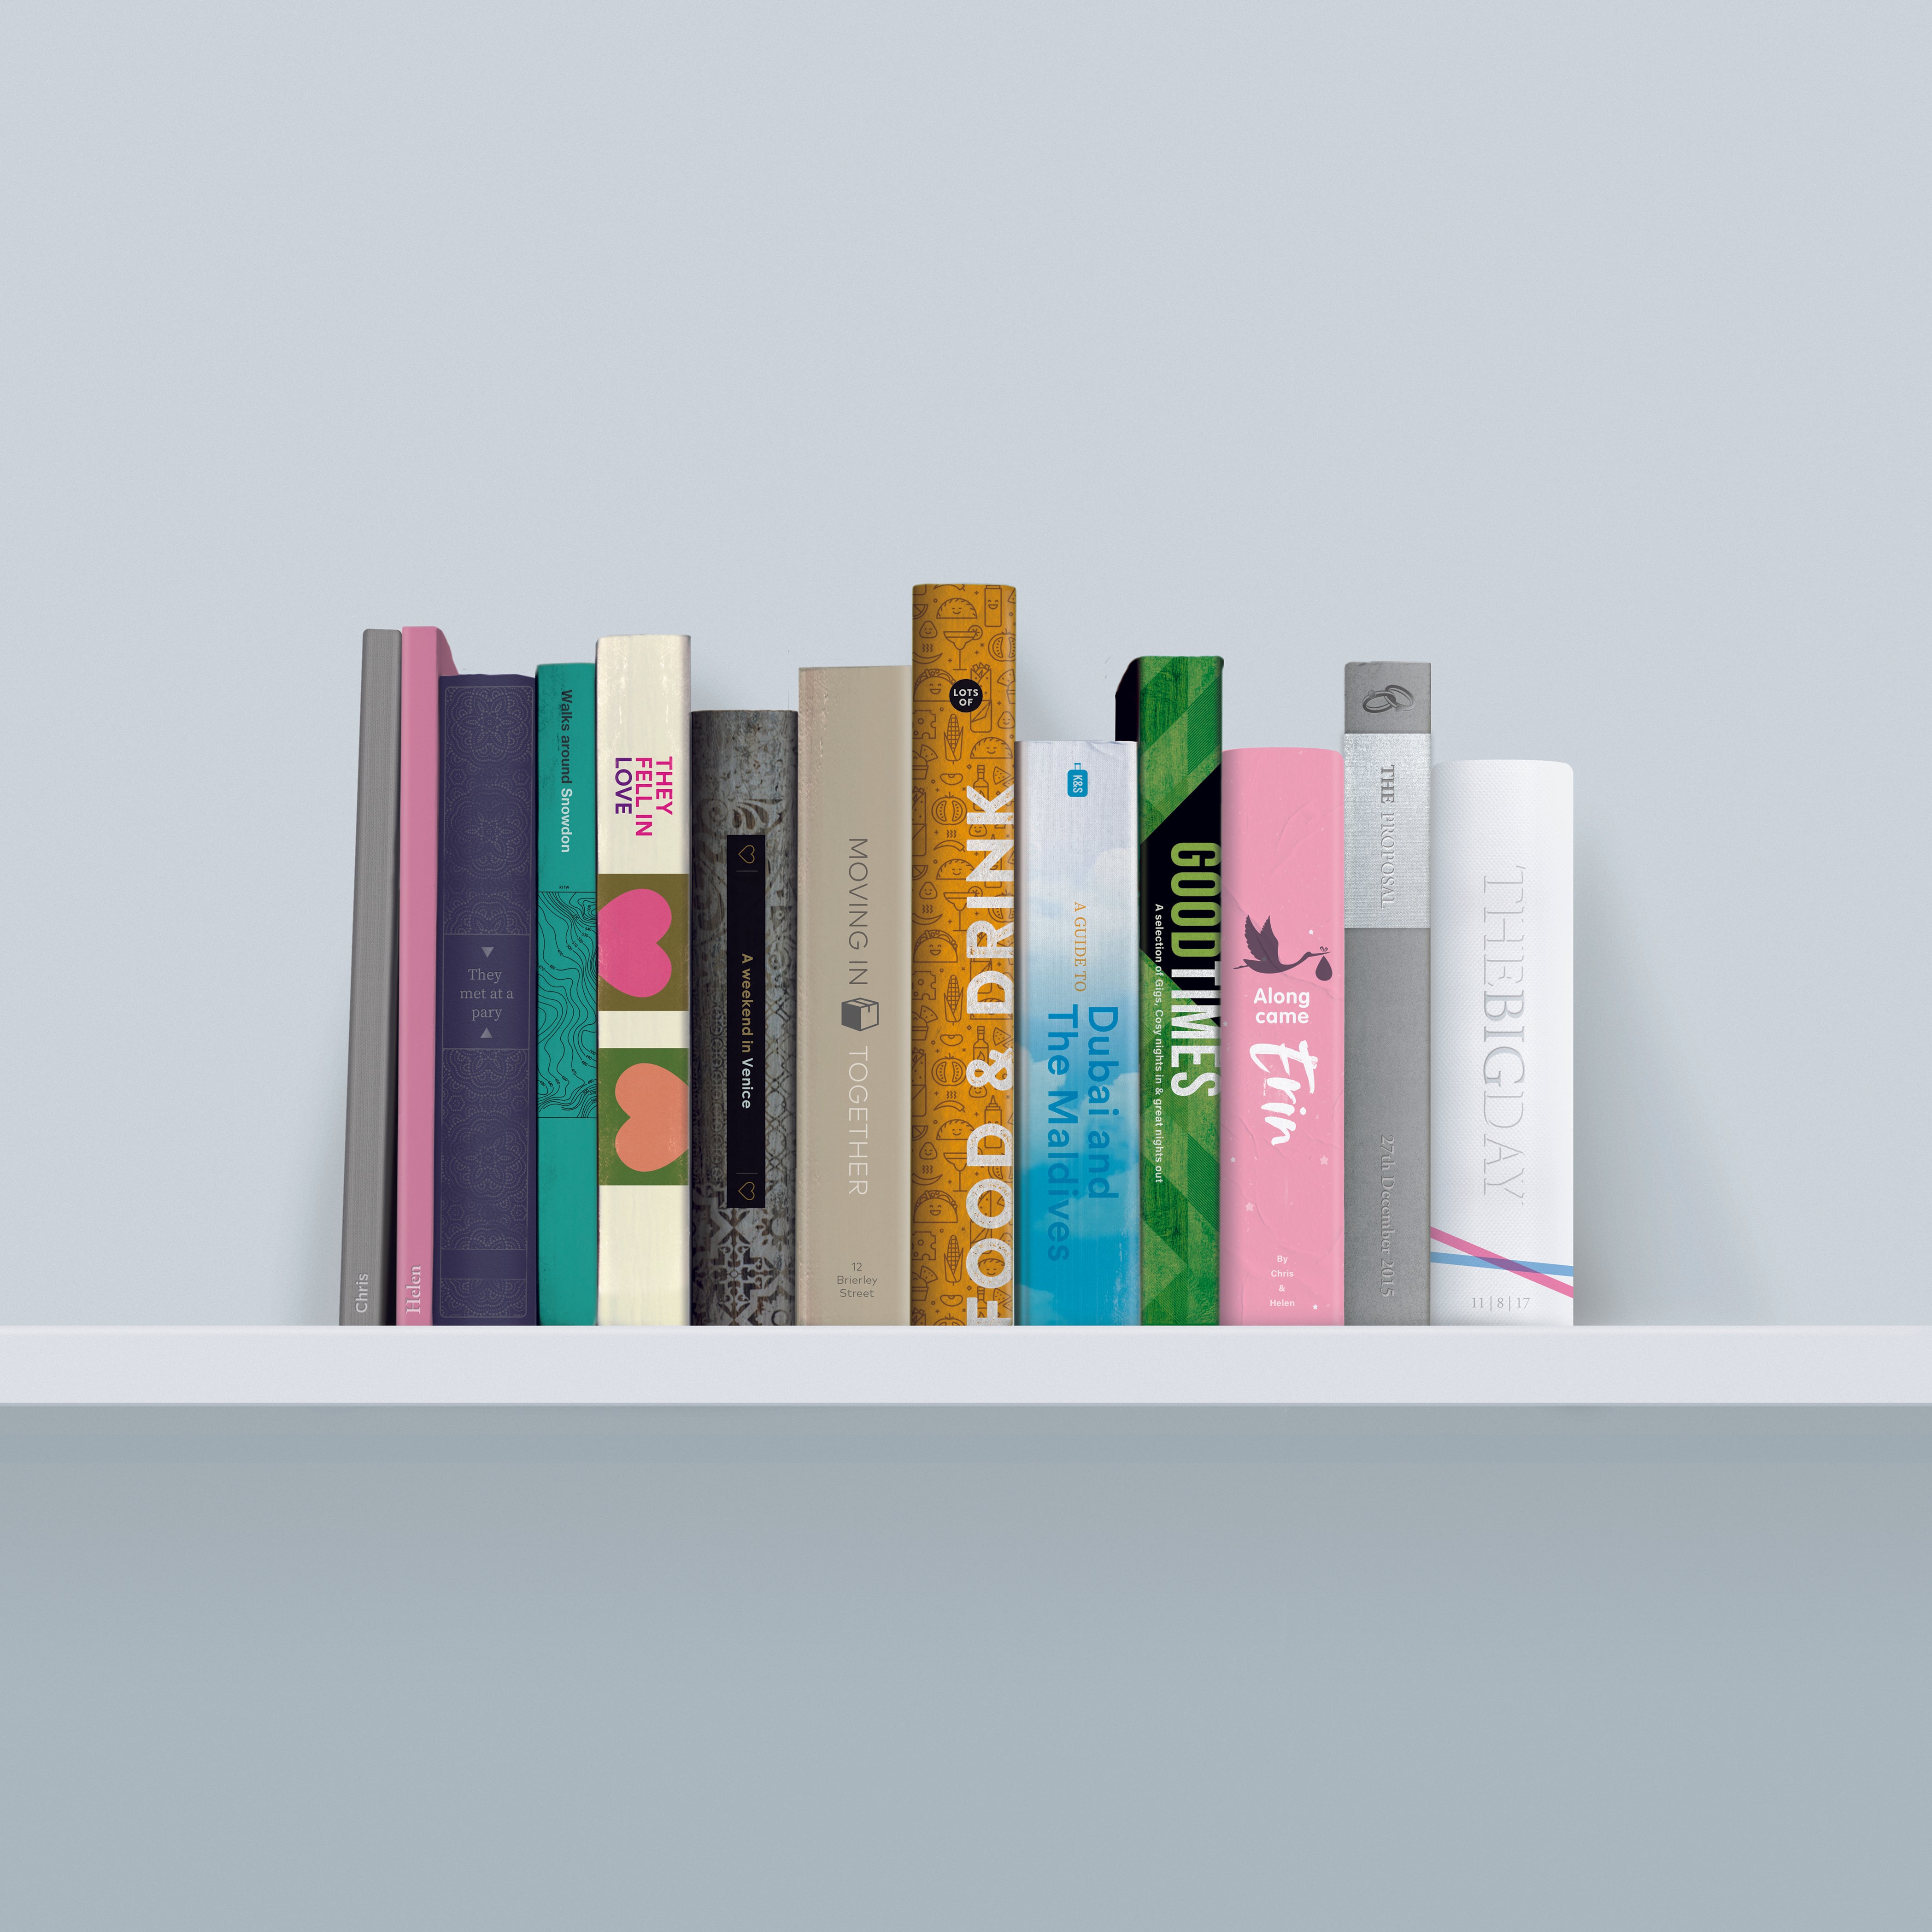 Love Story Print – A bookshelf that tells YOUR story of love... each book is a different stage of your journey.